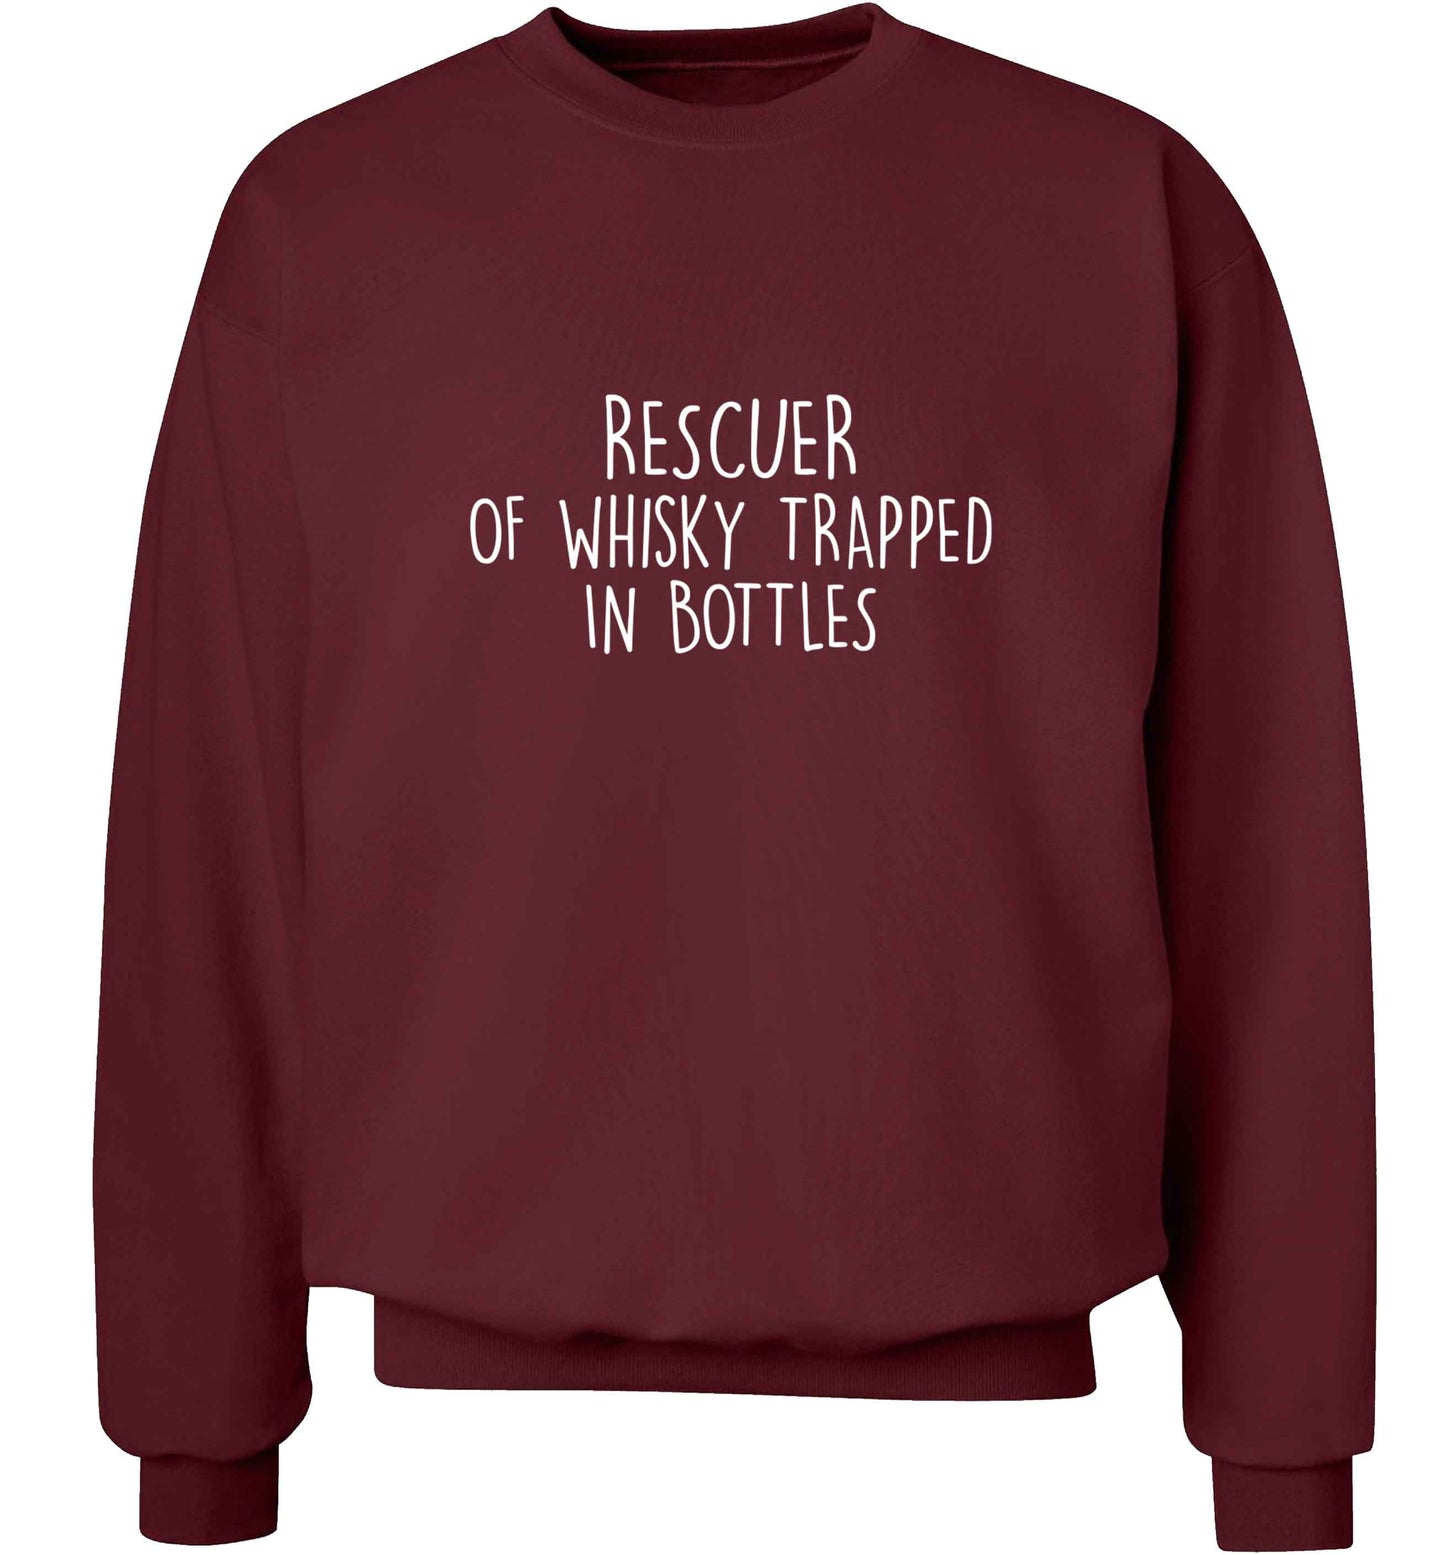 Rescuer of whisky trapped in bottles adult's unisex maroon sweater 2XL